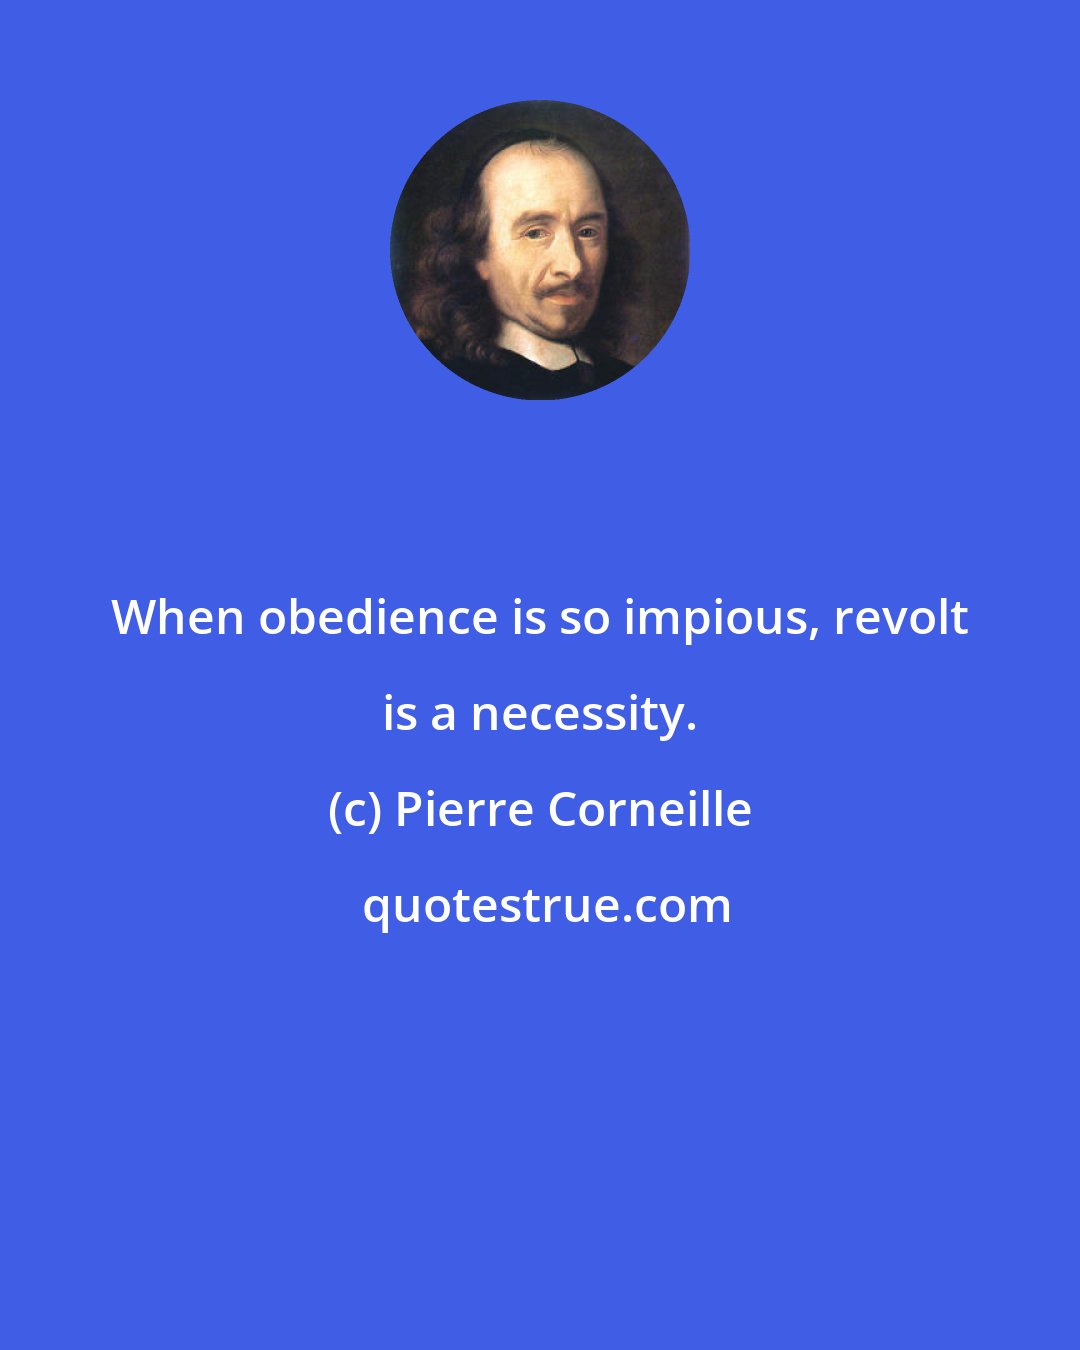 Pierre Corneille: When obedience is so impious, revolt is a necessity.